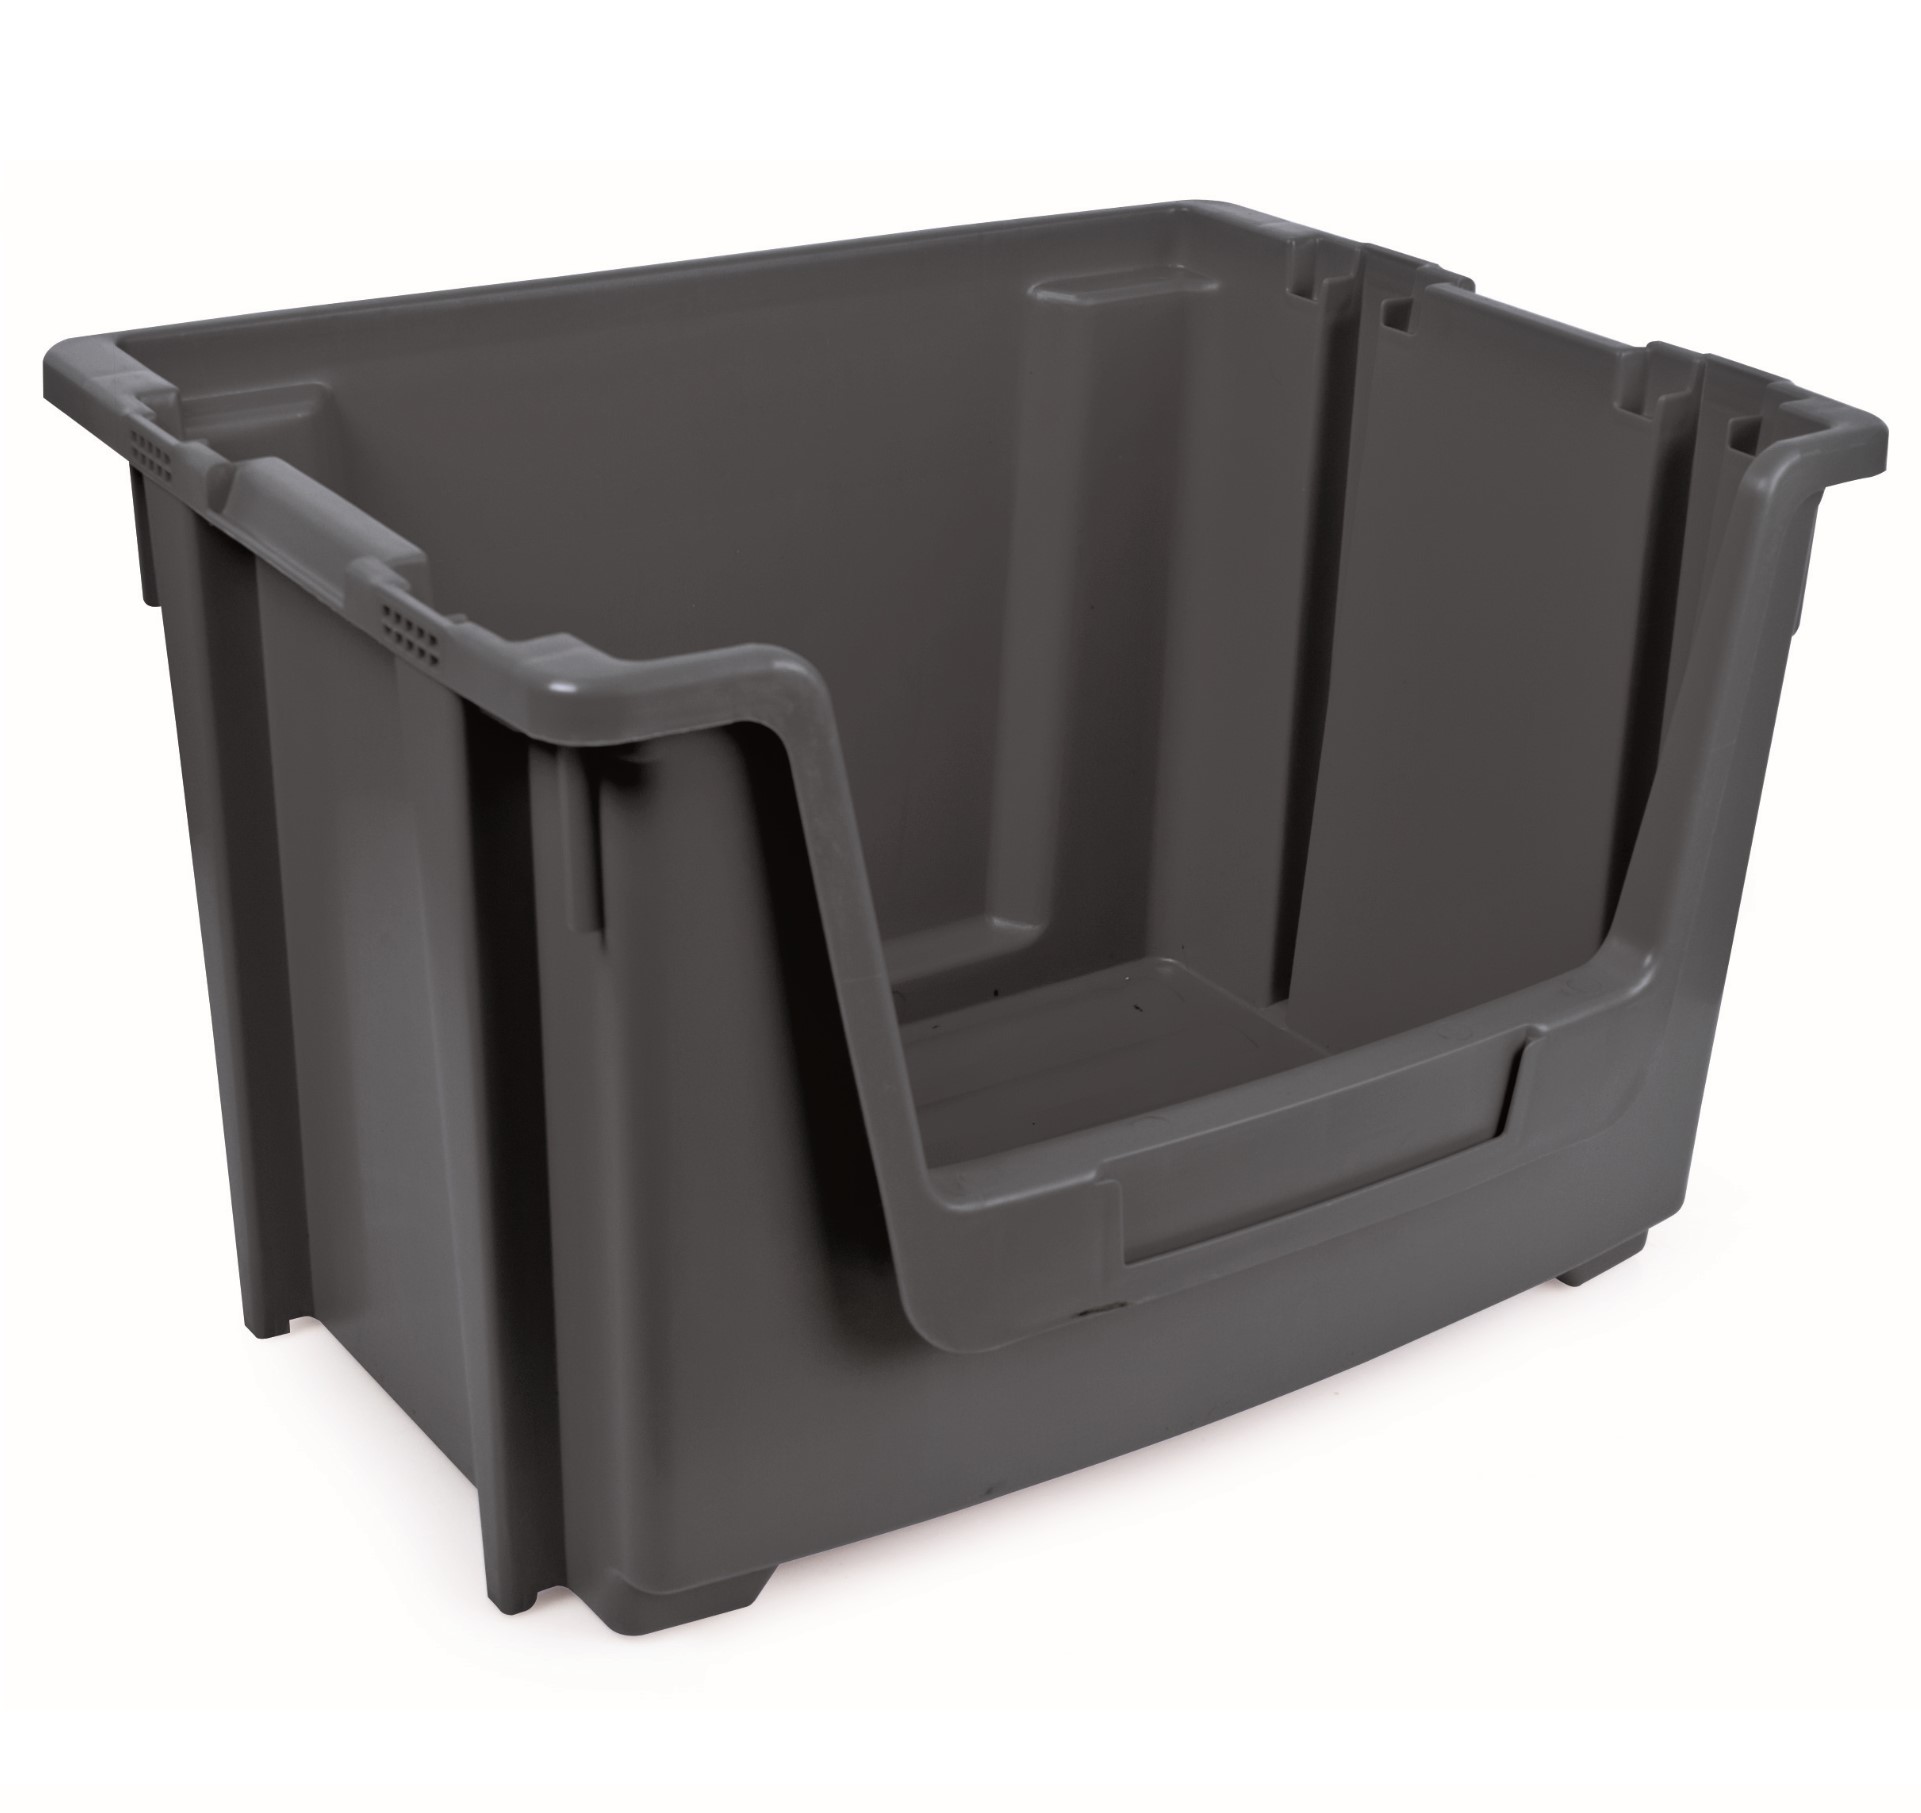 Storage Boxes, Bins & Containers